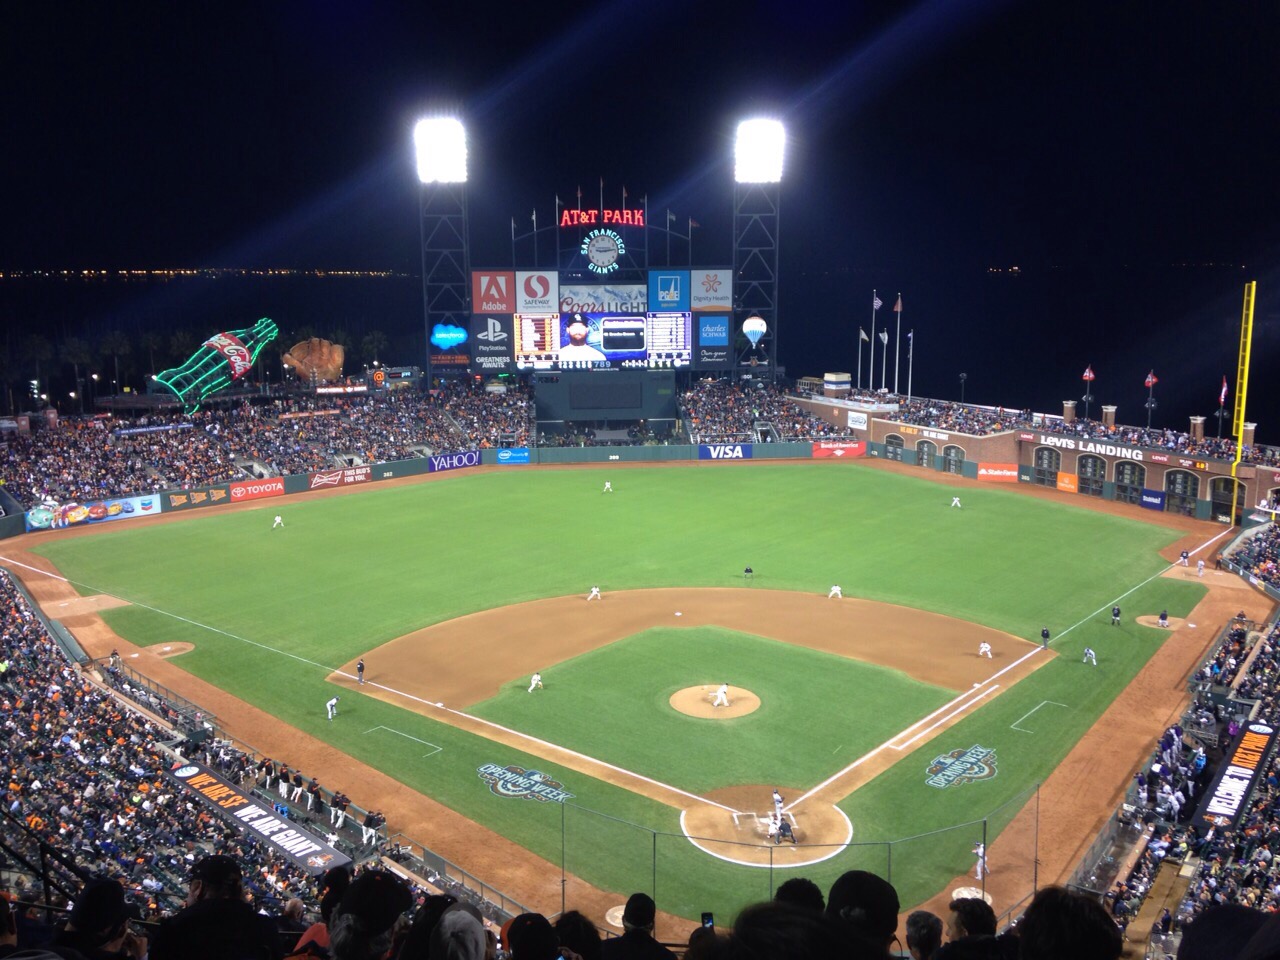 Top things to do for a first time visit in San Francisco - AT&amp;T Park, the Giant’s Baseball Stadium